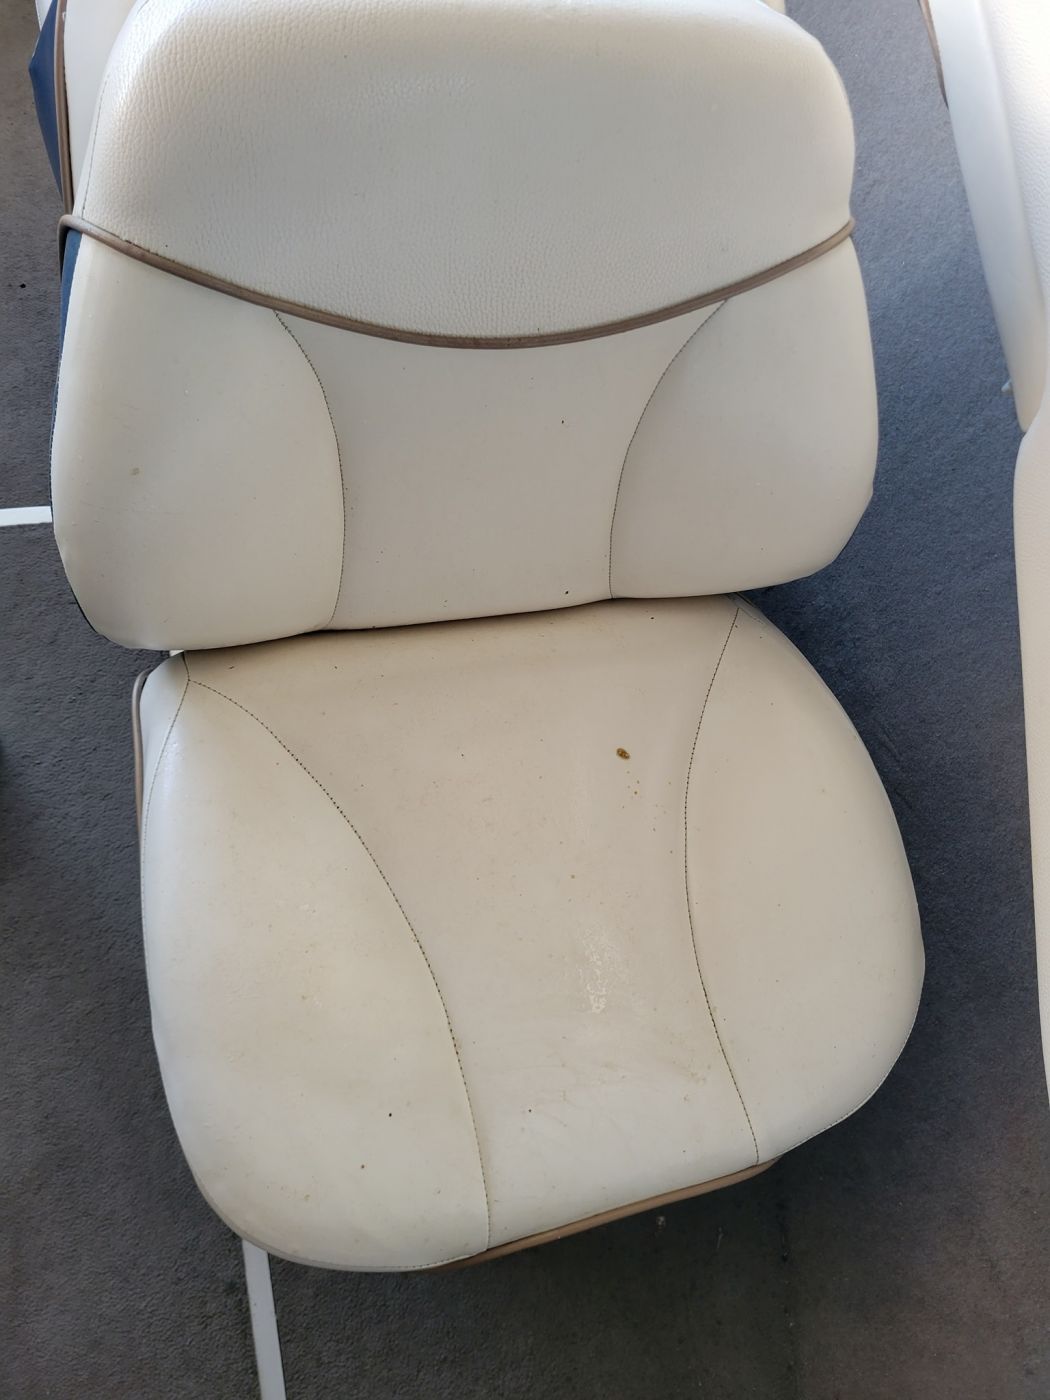 Boat Seat Cleaning